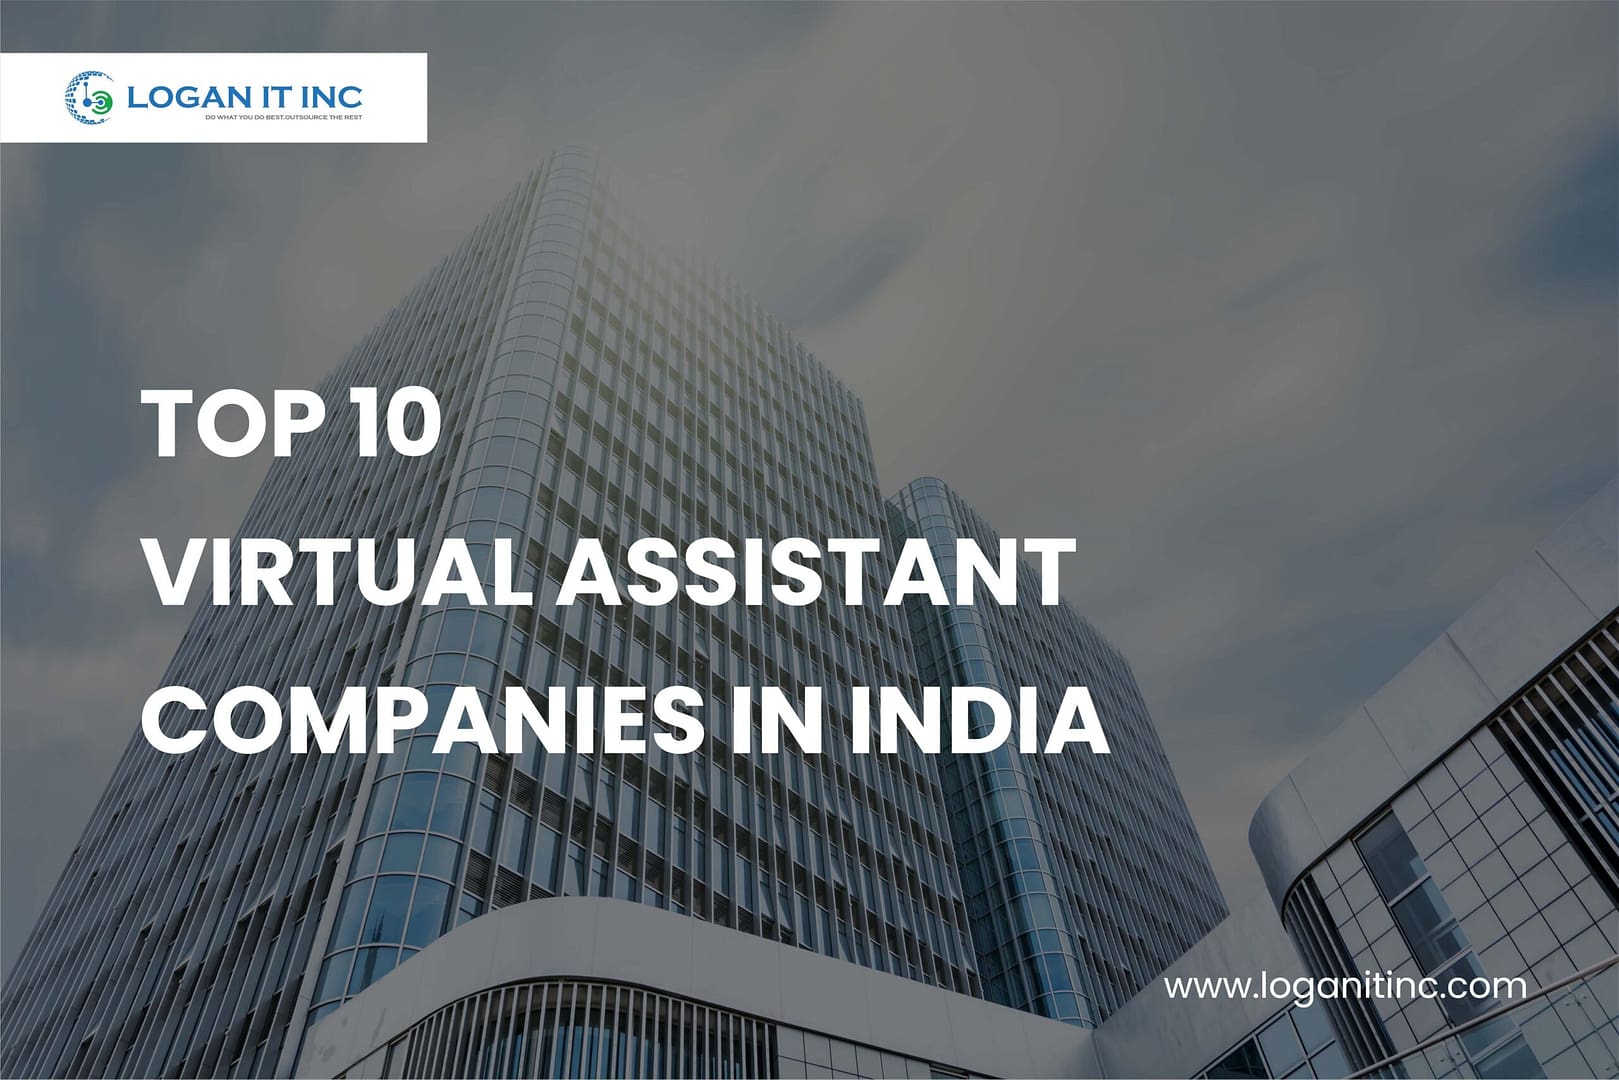 Top virtual assistant companies in india | Top 10 virtual assistant companies in india | Logan IT Inc